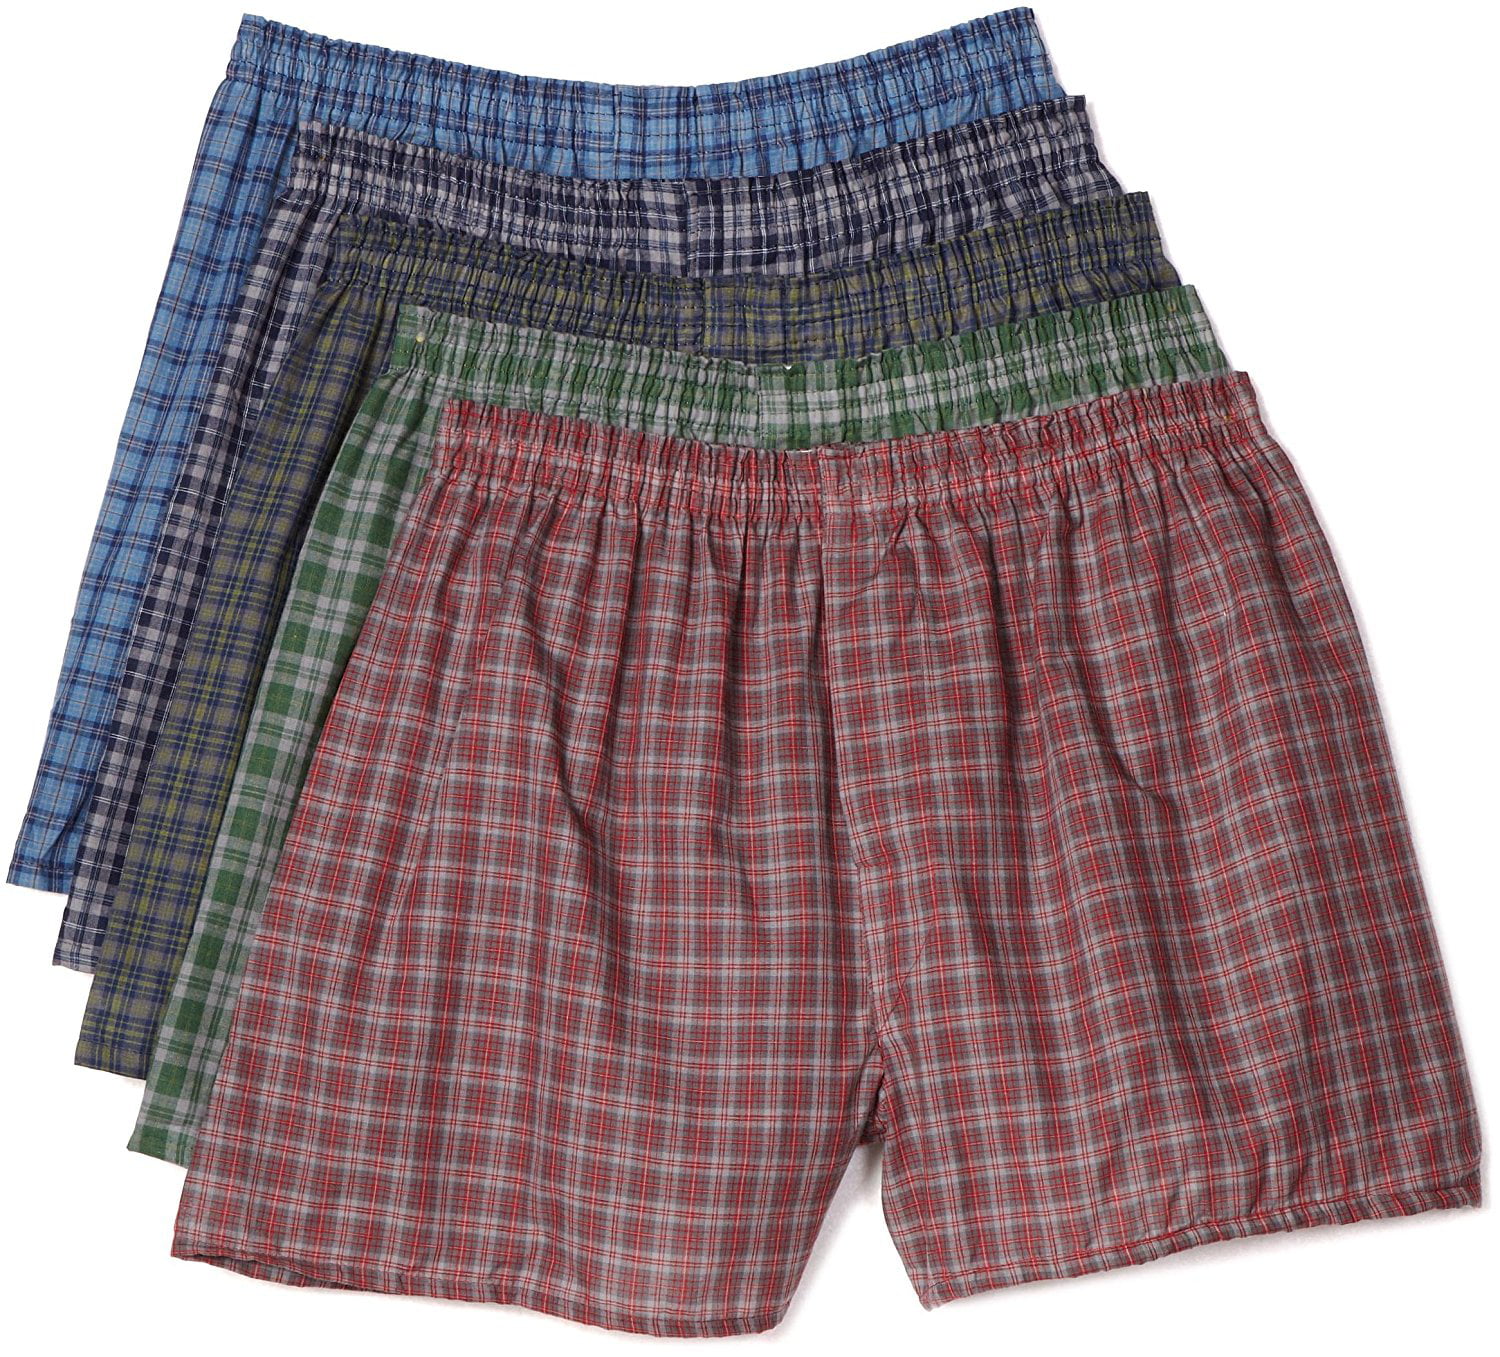 Fruit Of The Loom Mens Woven Plaid Boxers 5 Pack 3XL - Walmart.com